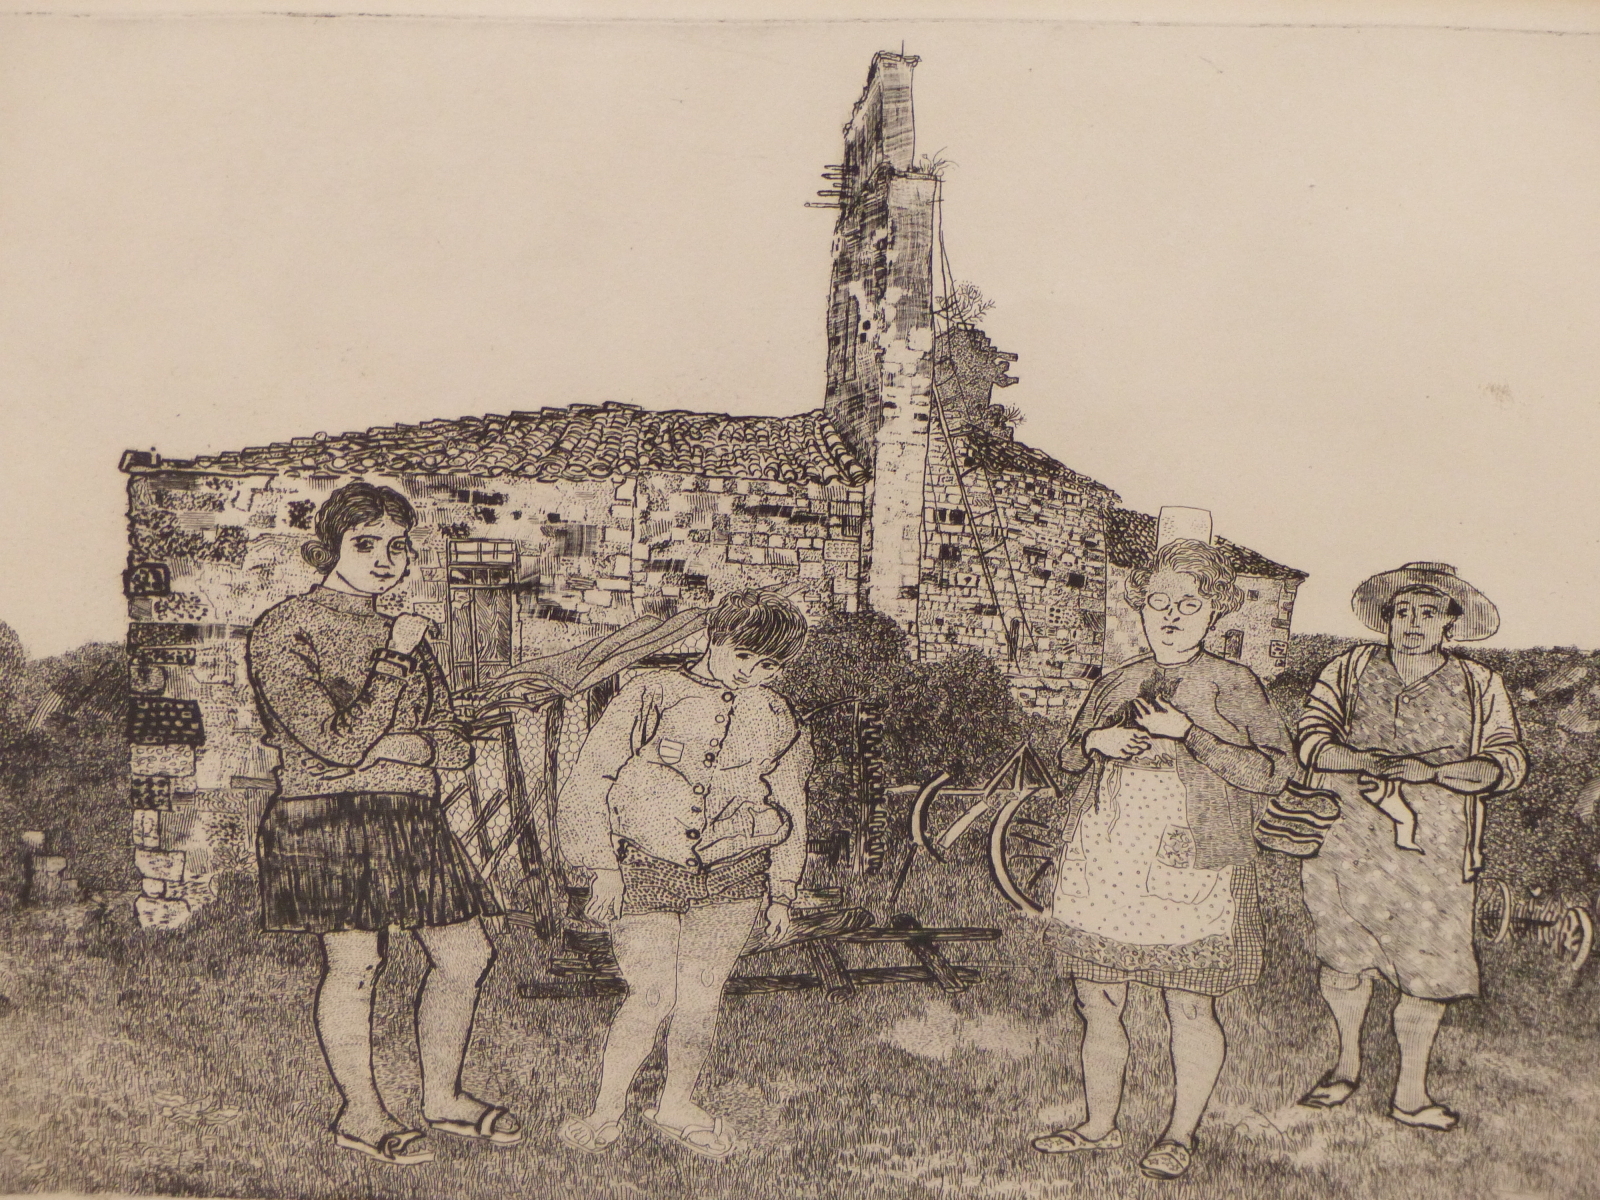 ANTHONY GROSS (BRITISH 1905-1984) ARR. SEGOS.2/2 2nd STATE TRIAL ETCHING, SIGNED AND TITLED IN